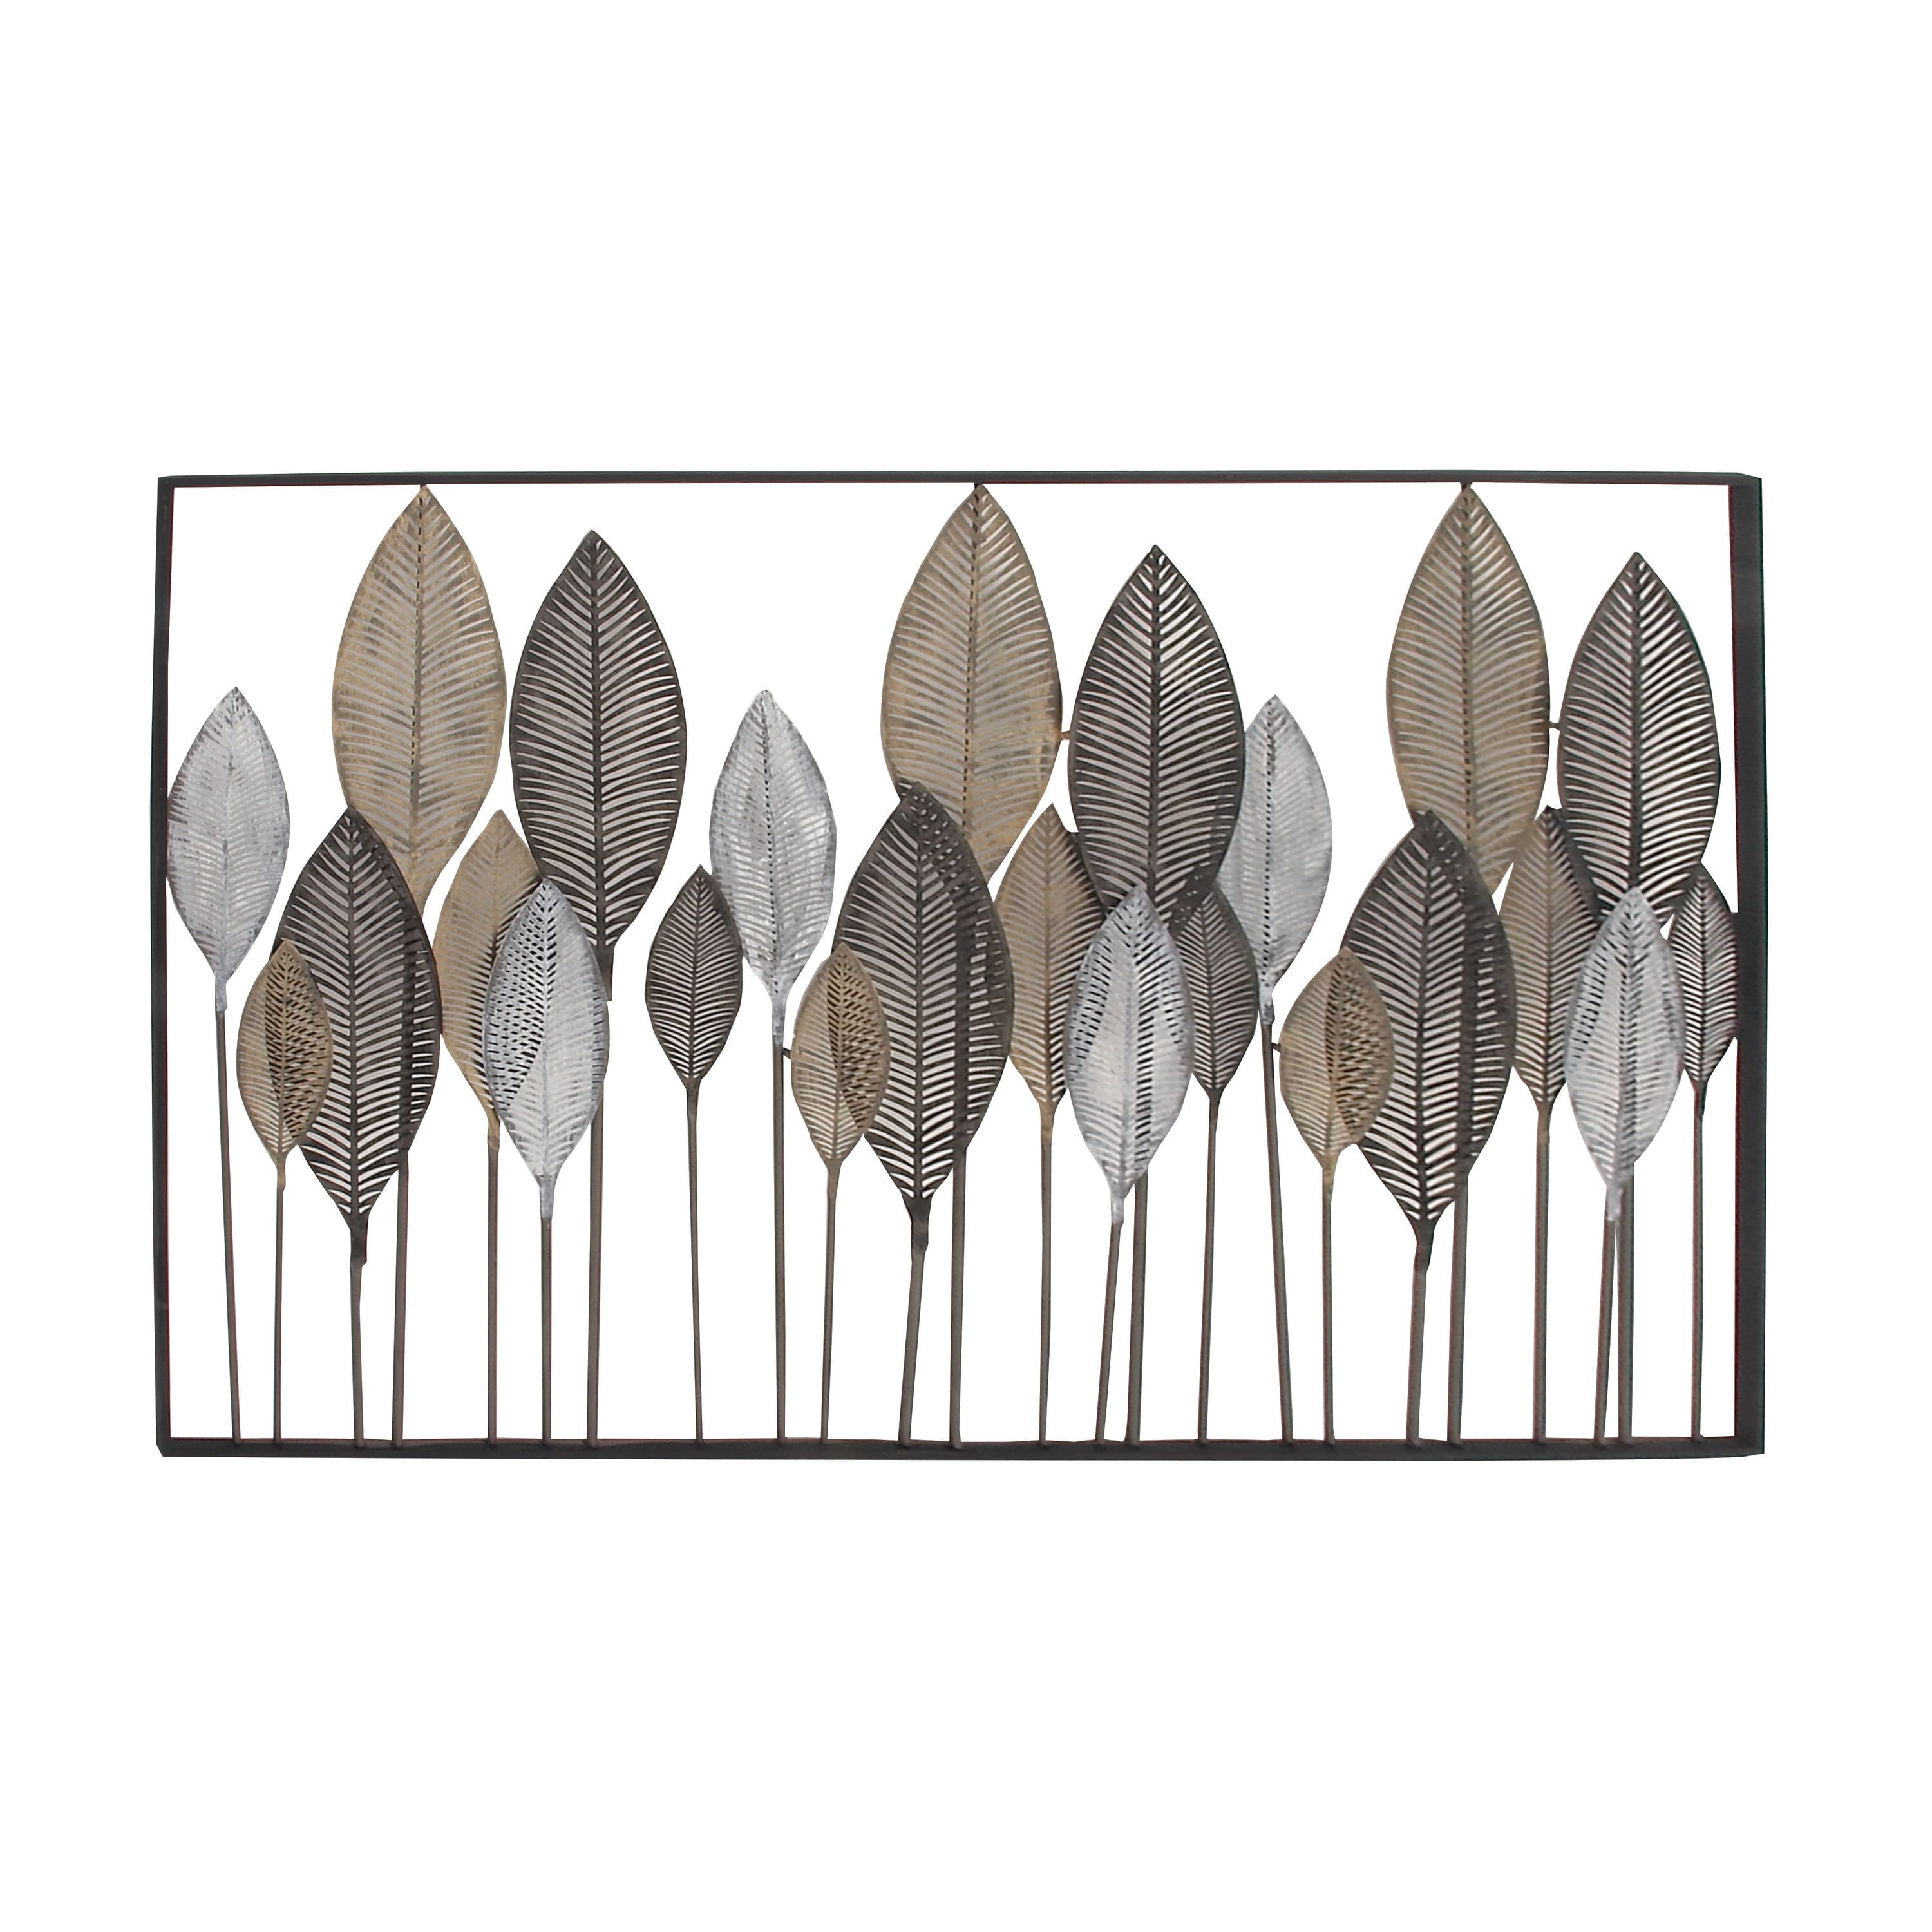 Decmode Bronze Metal Tall Cut Out Leaf Wall Decor With Intricate Laser Cut  Designs – Walmart In Latest Tall Cut Out Leaf Wall Art (View 6 of 20)